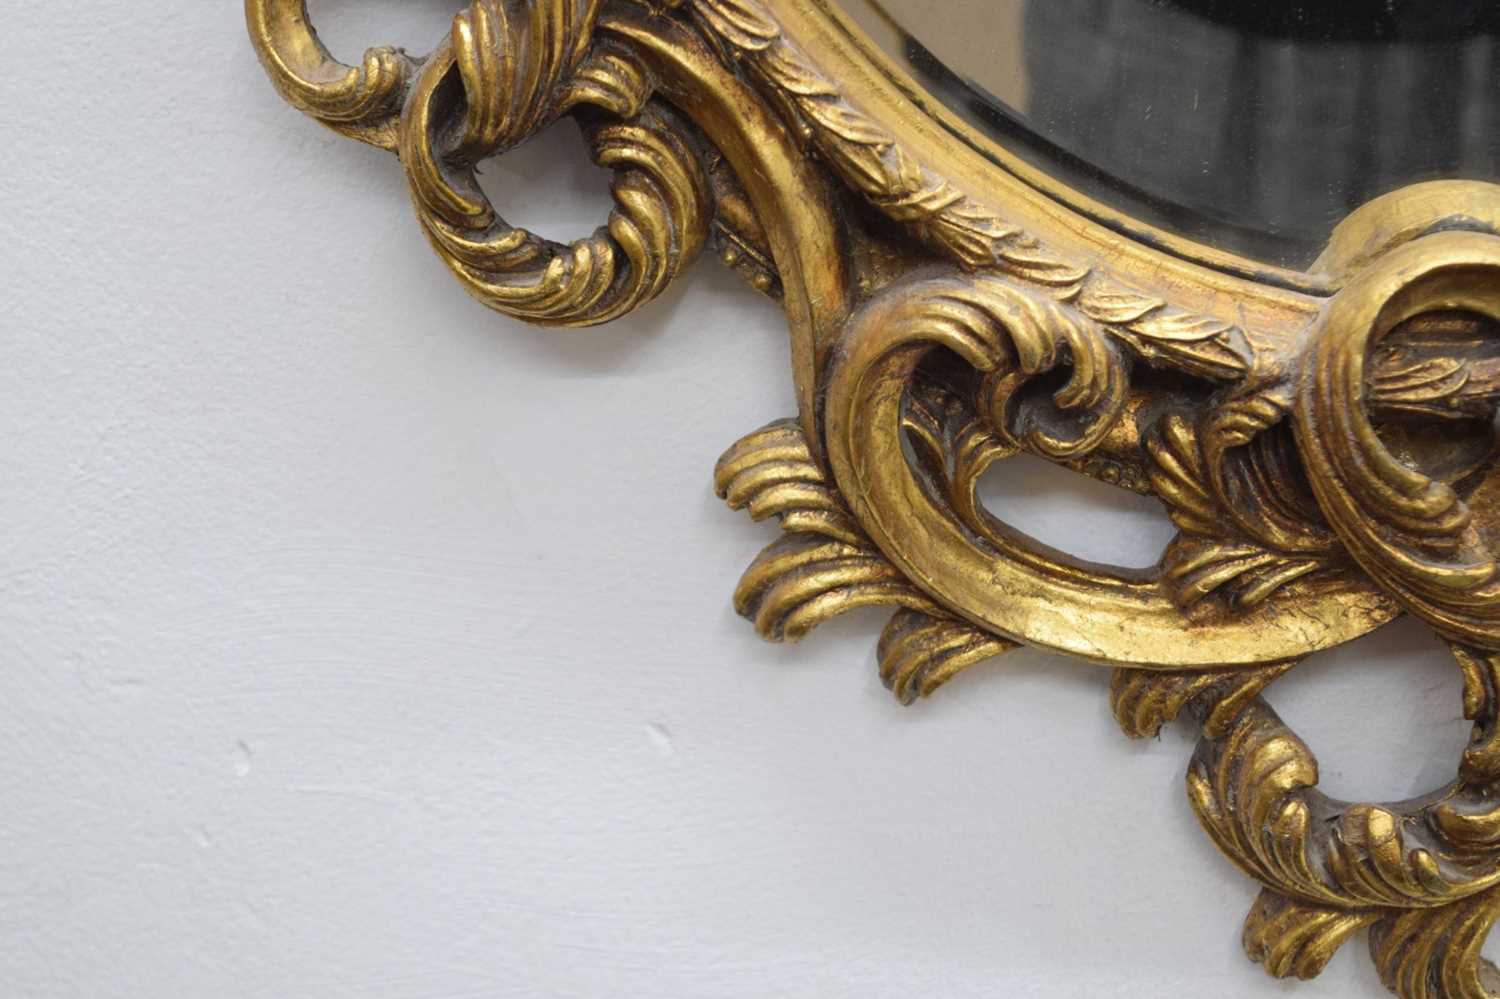 Reproduction giltwood oval wall mirror - Image 7 of 8